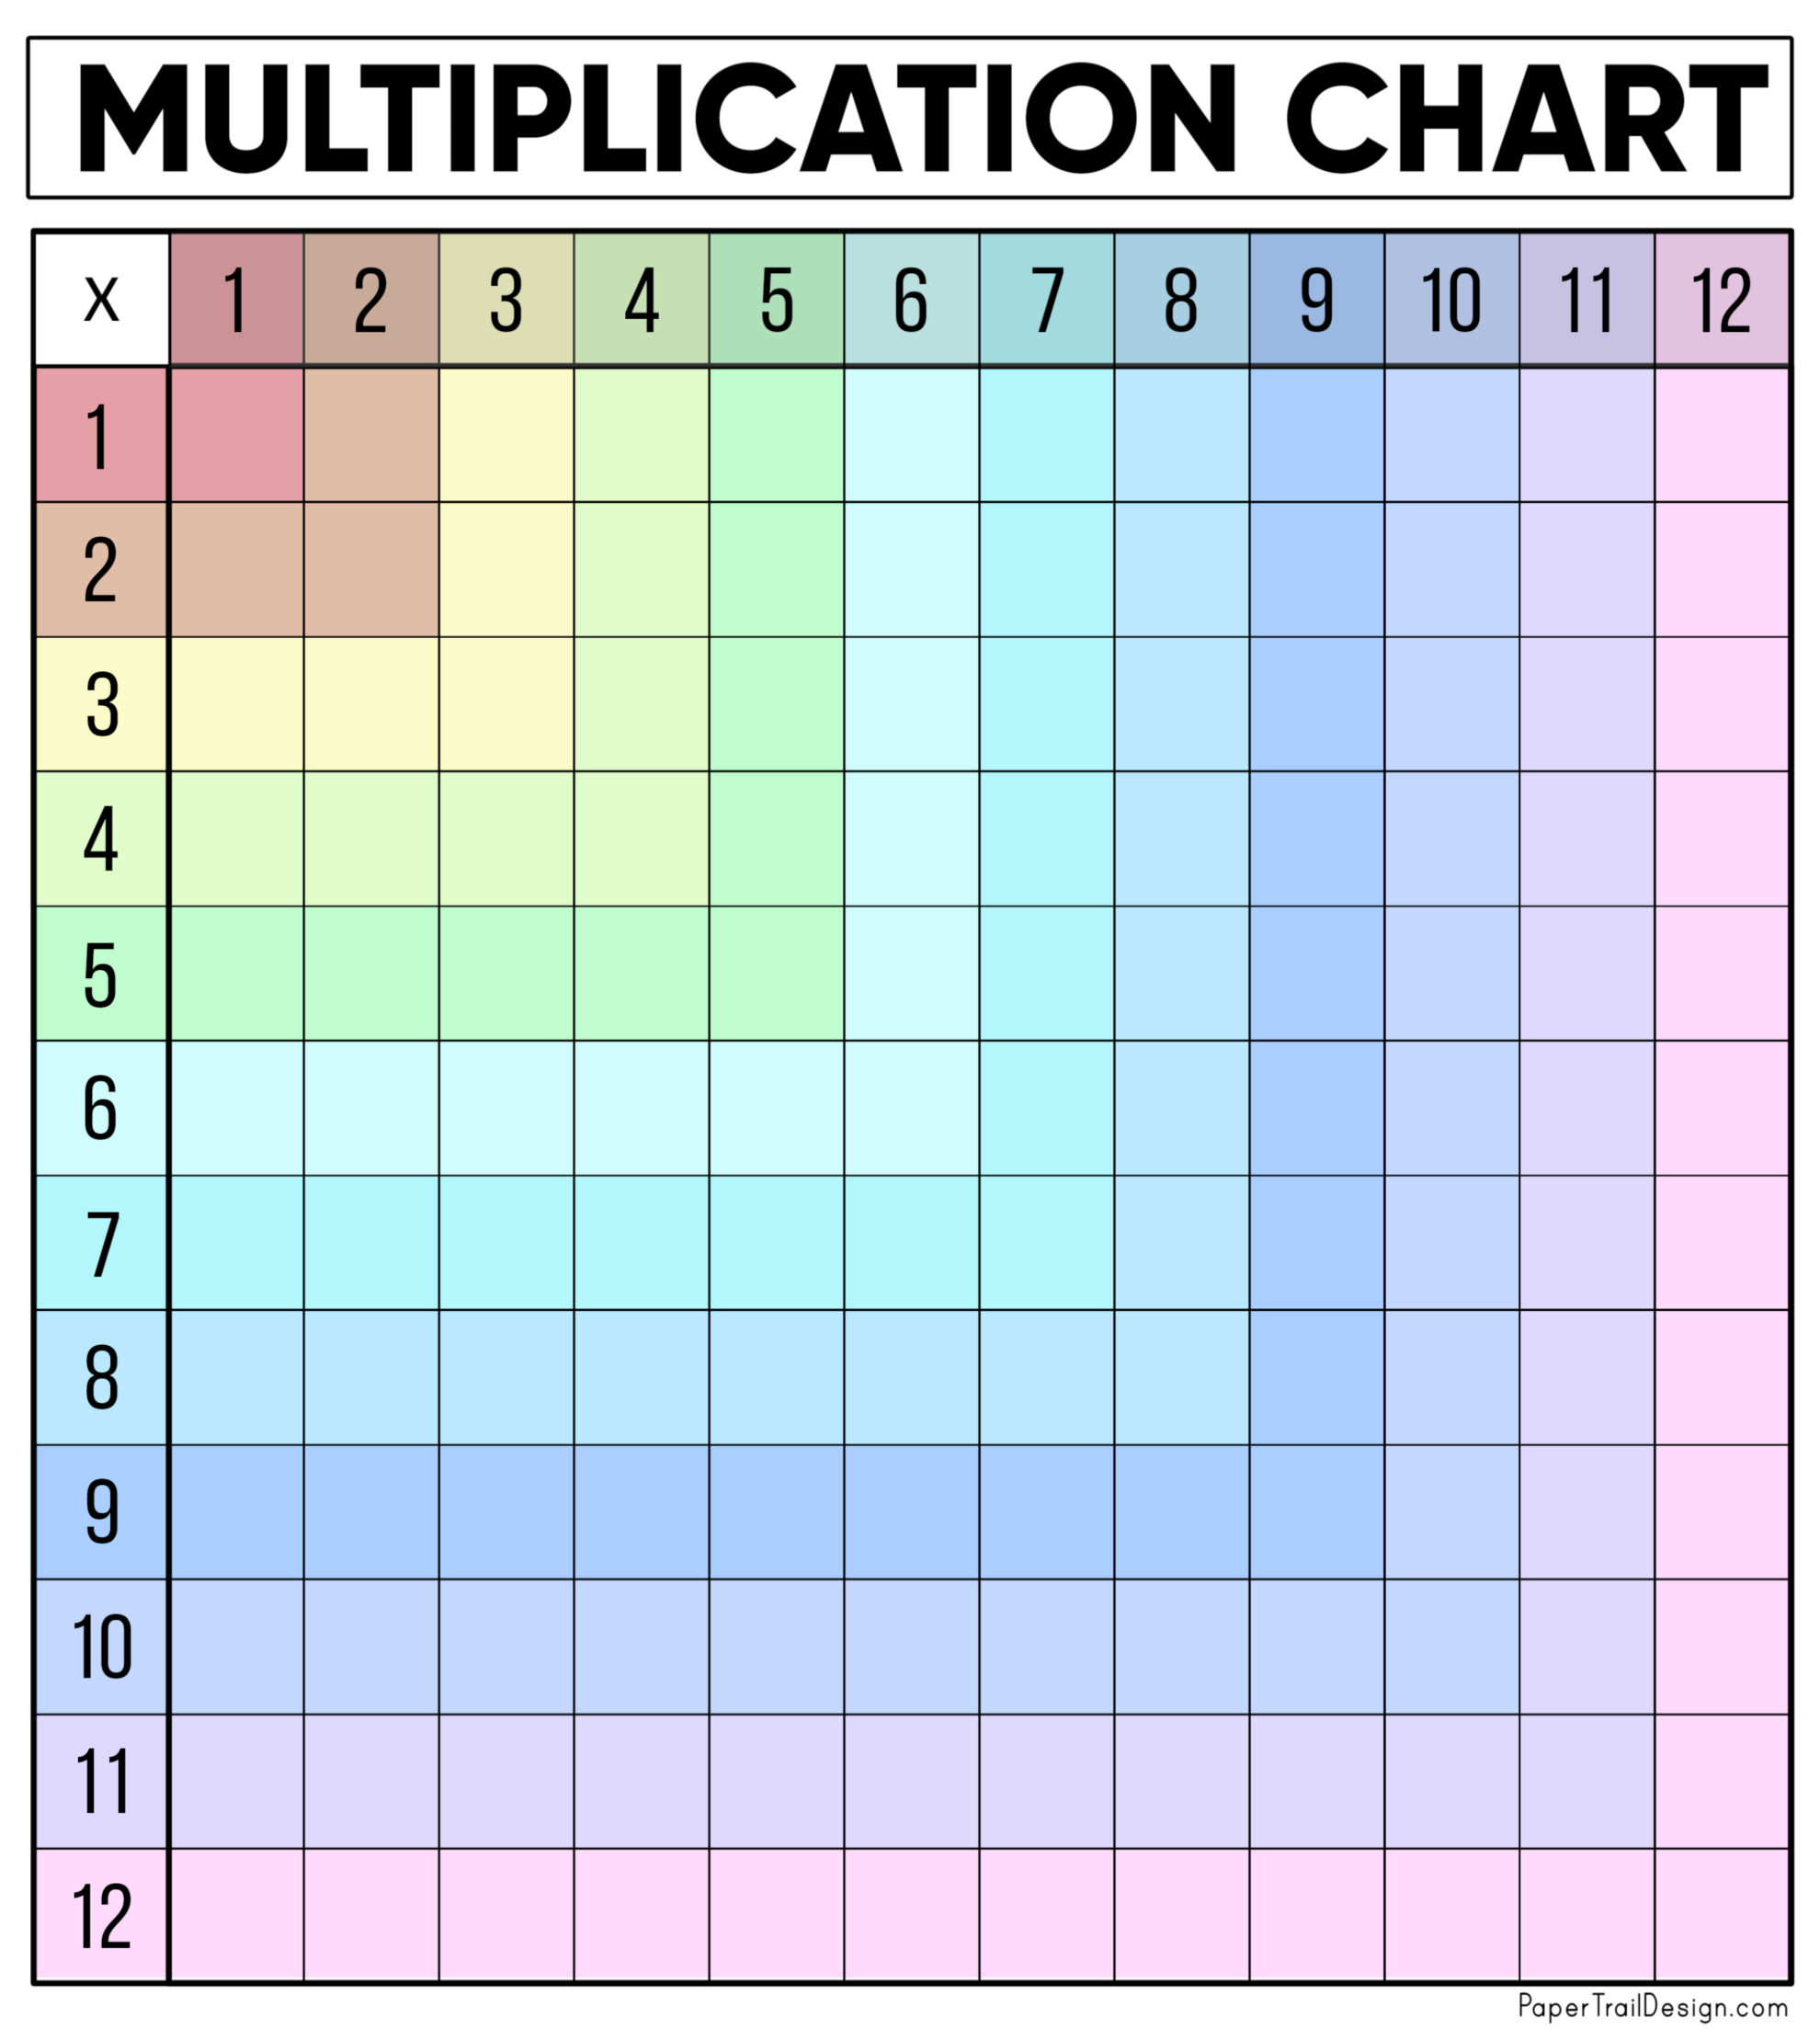 blank-times-table-chart-printable-images-and-photos-finder